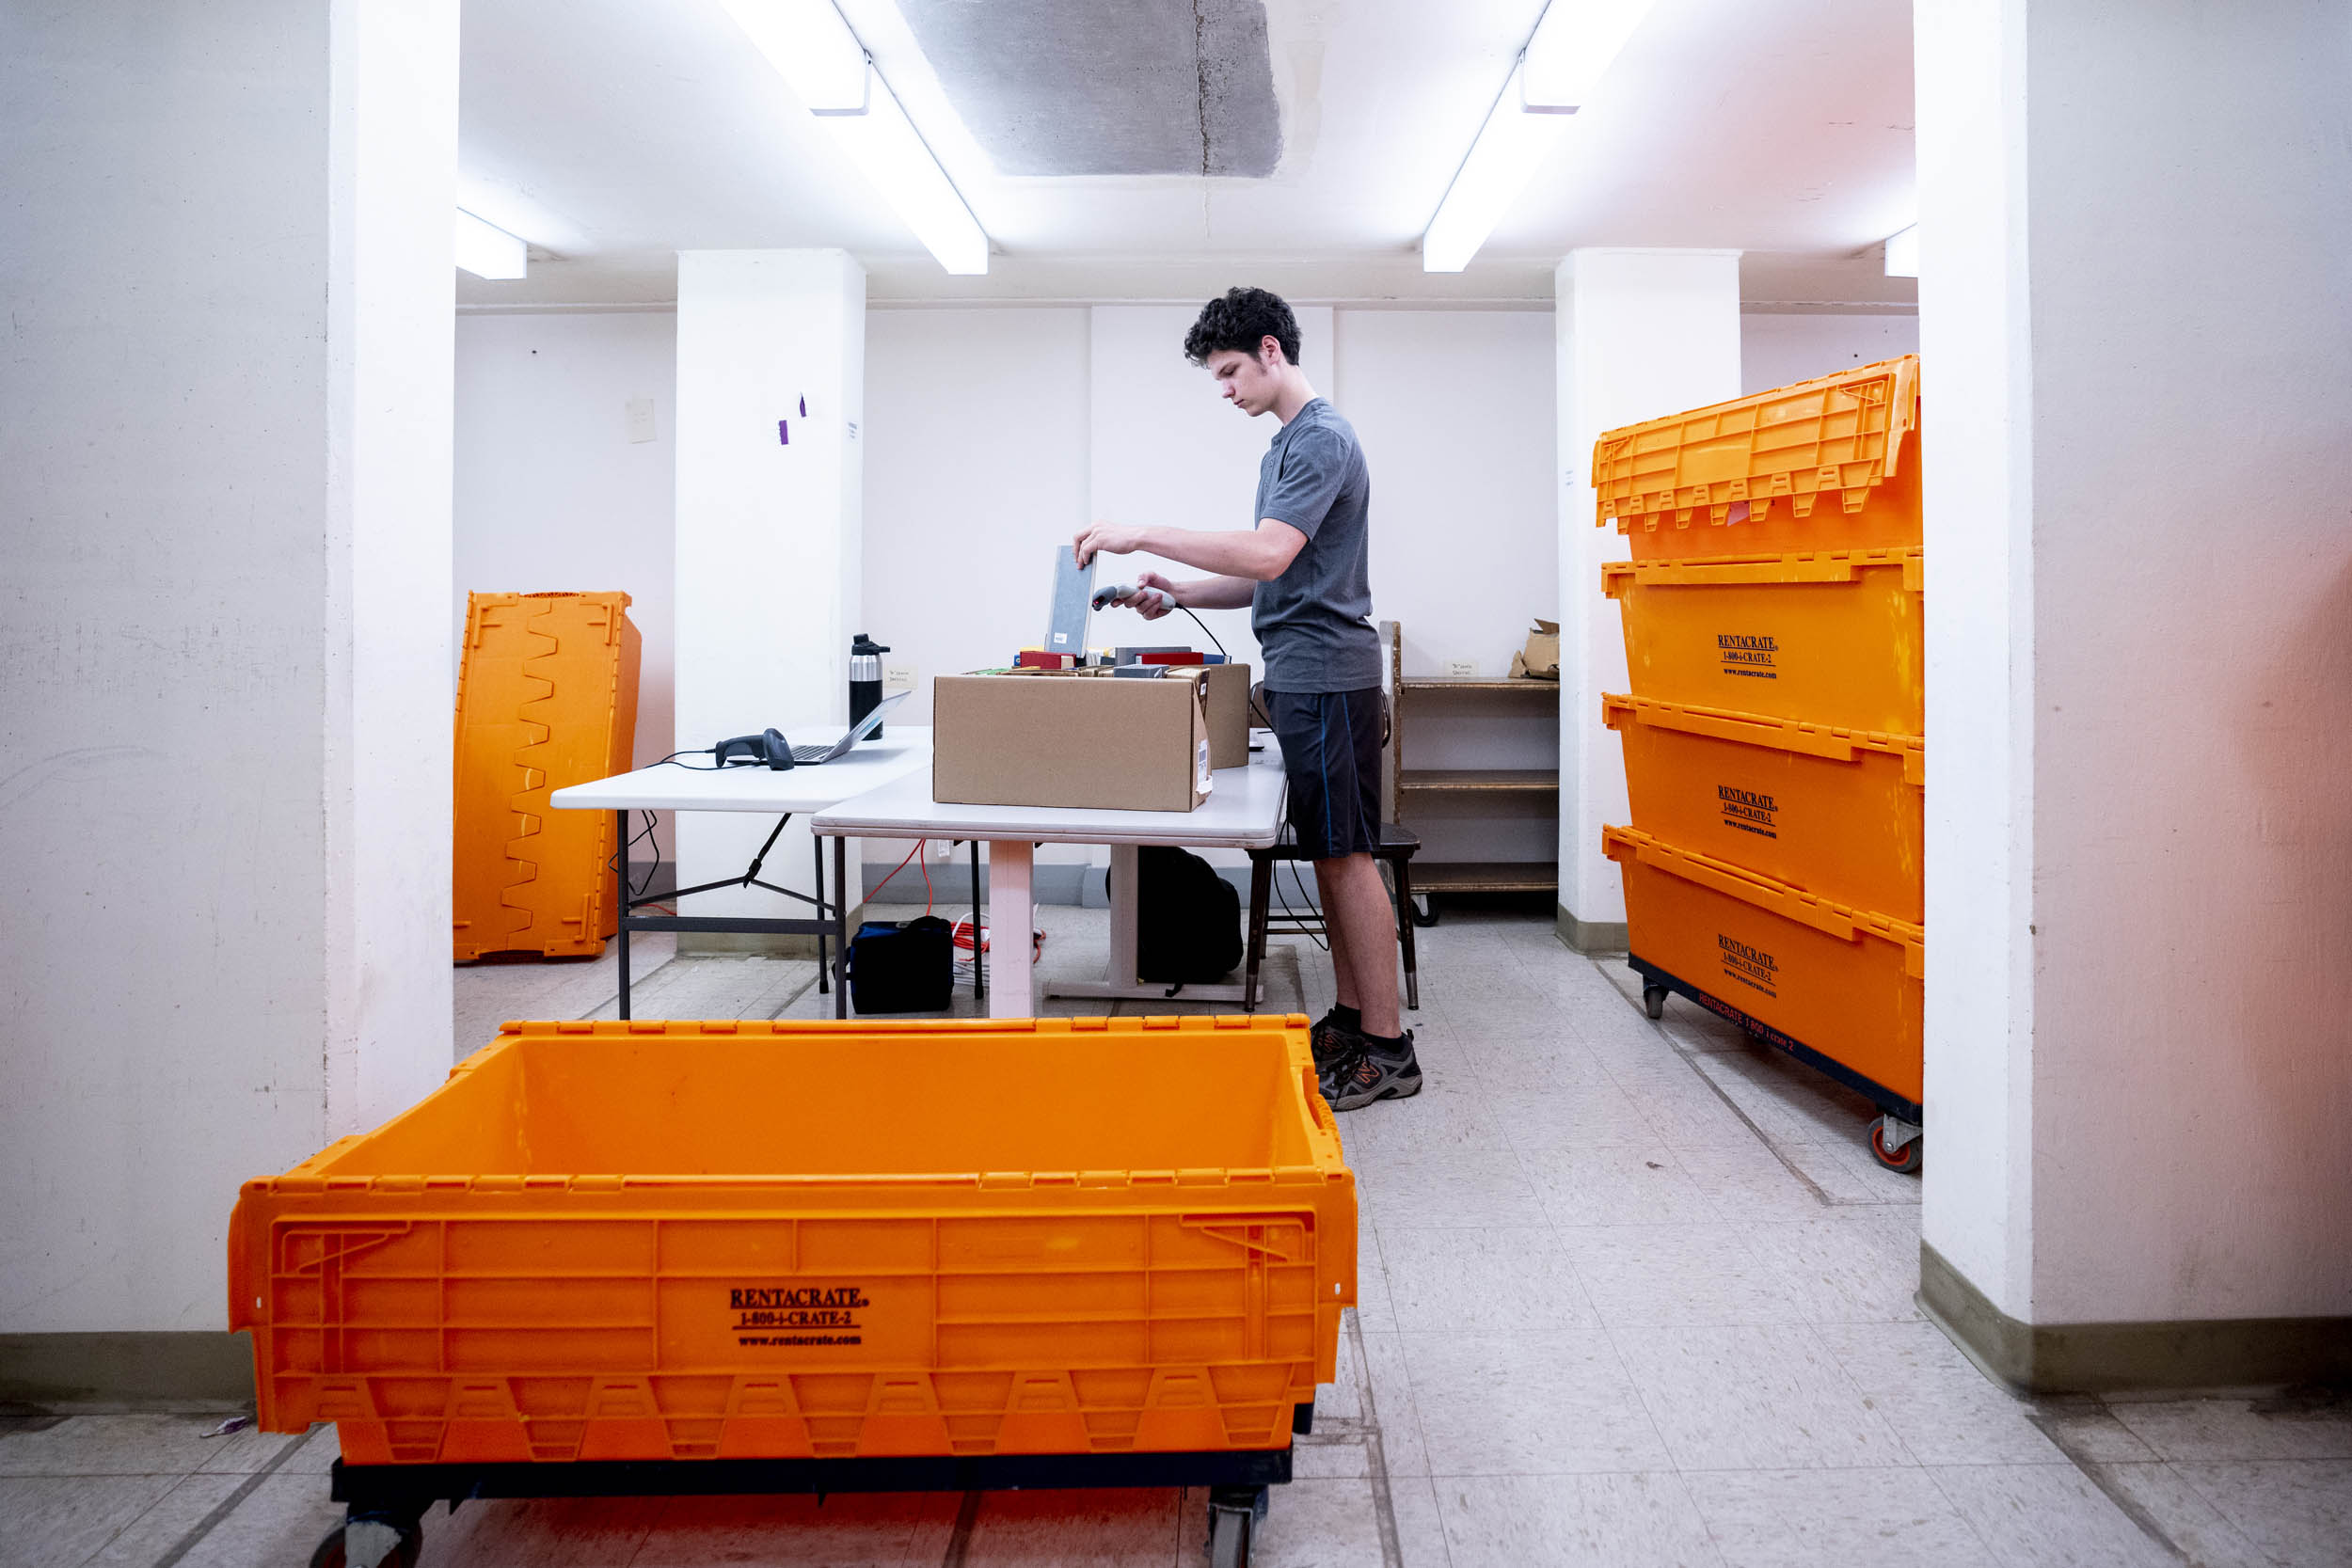 Jackson D’Errico scans books to place in bright orange tubs